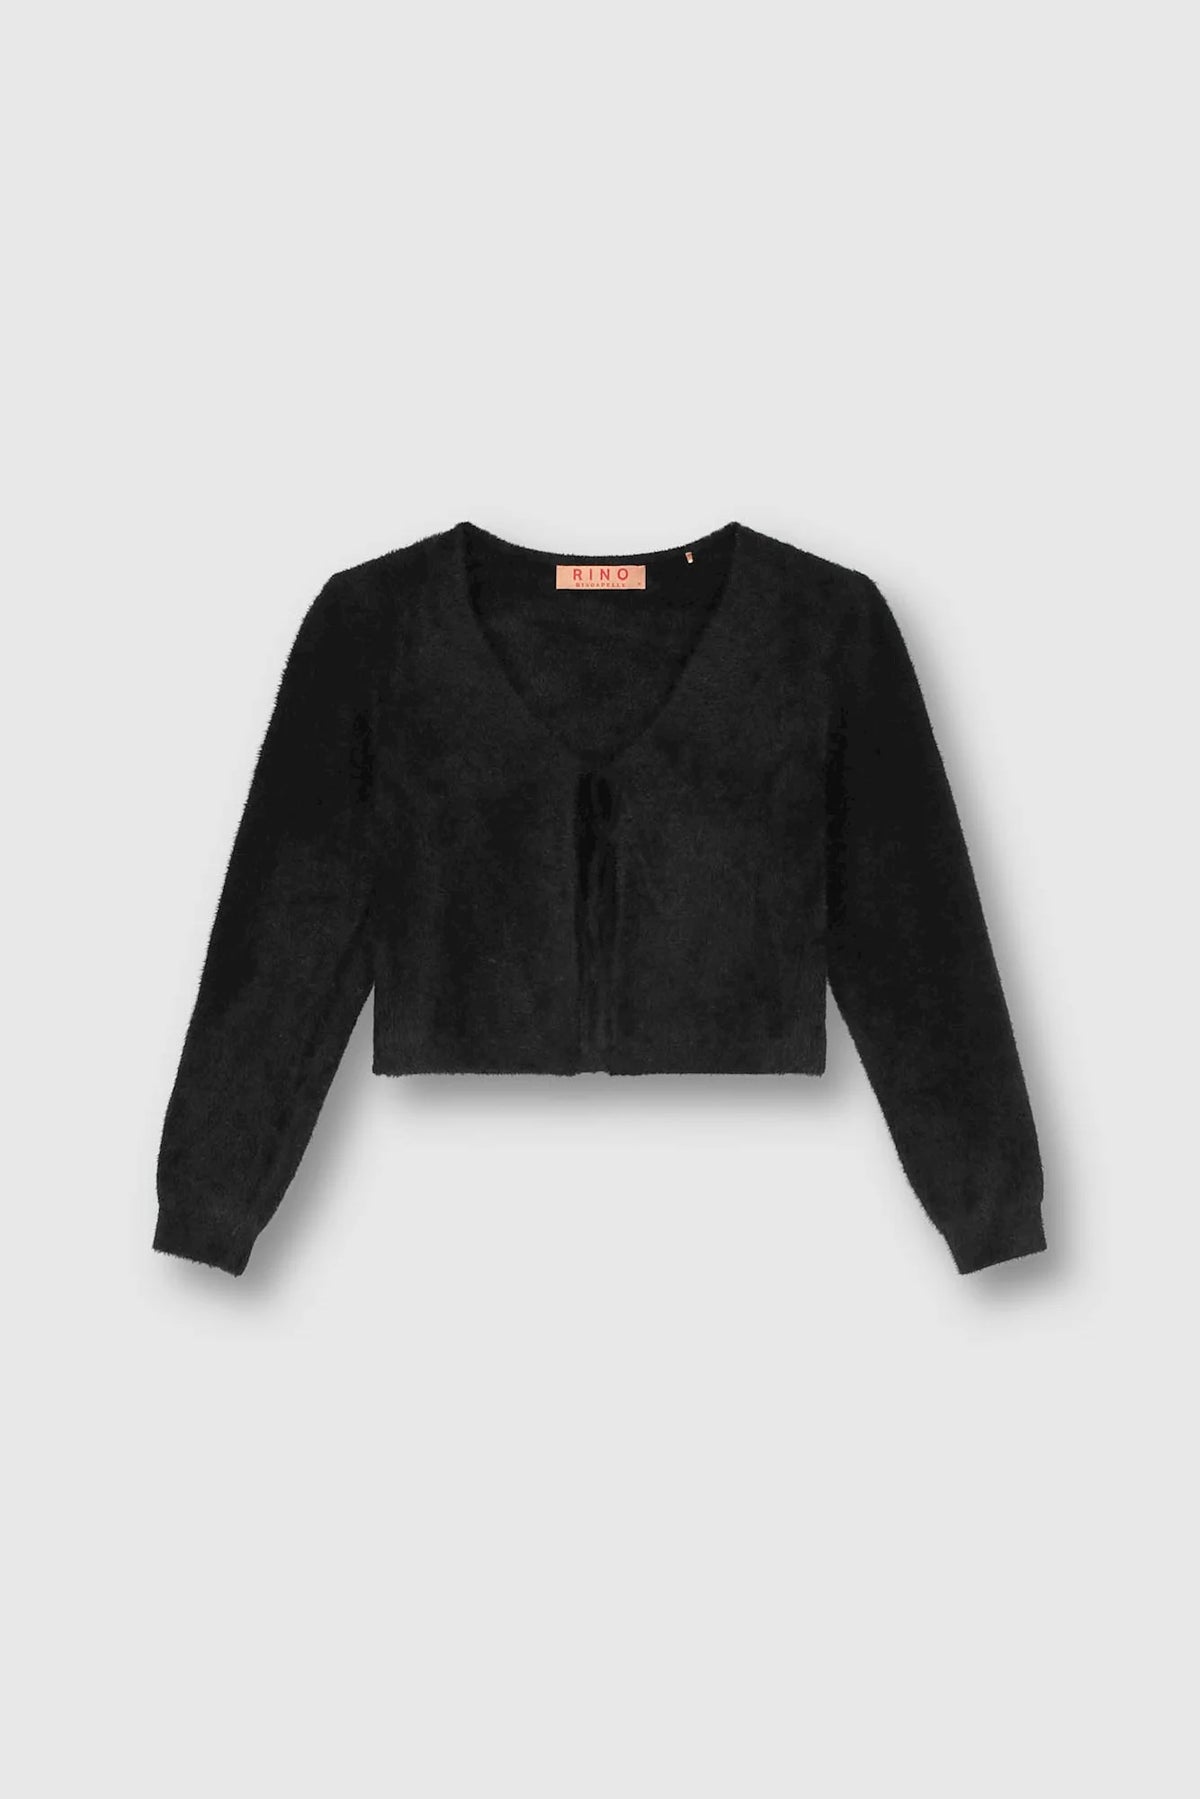 Cropped black long sleeved cardigan with tie fastening